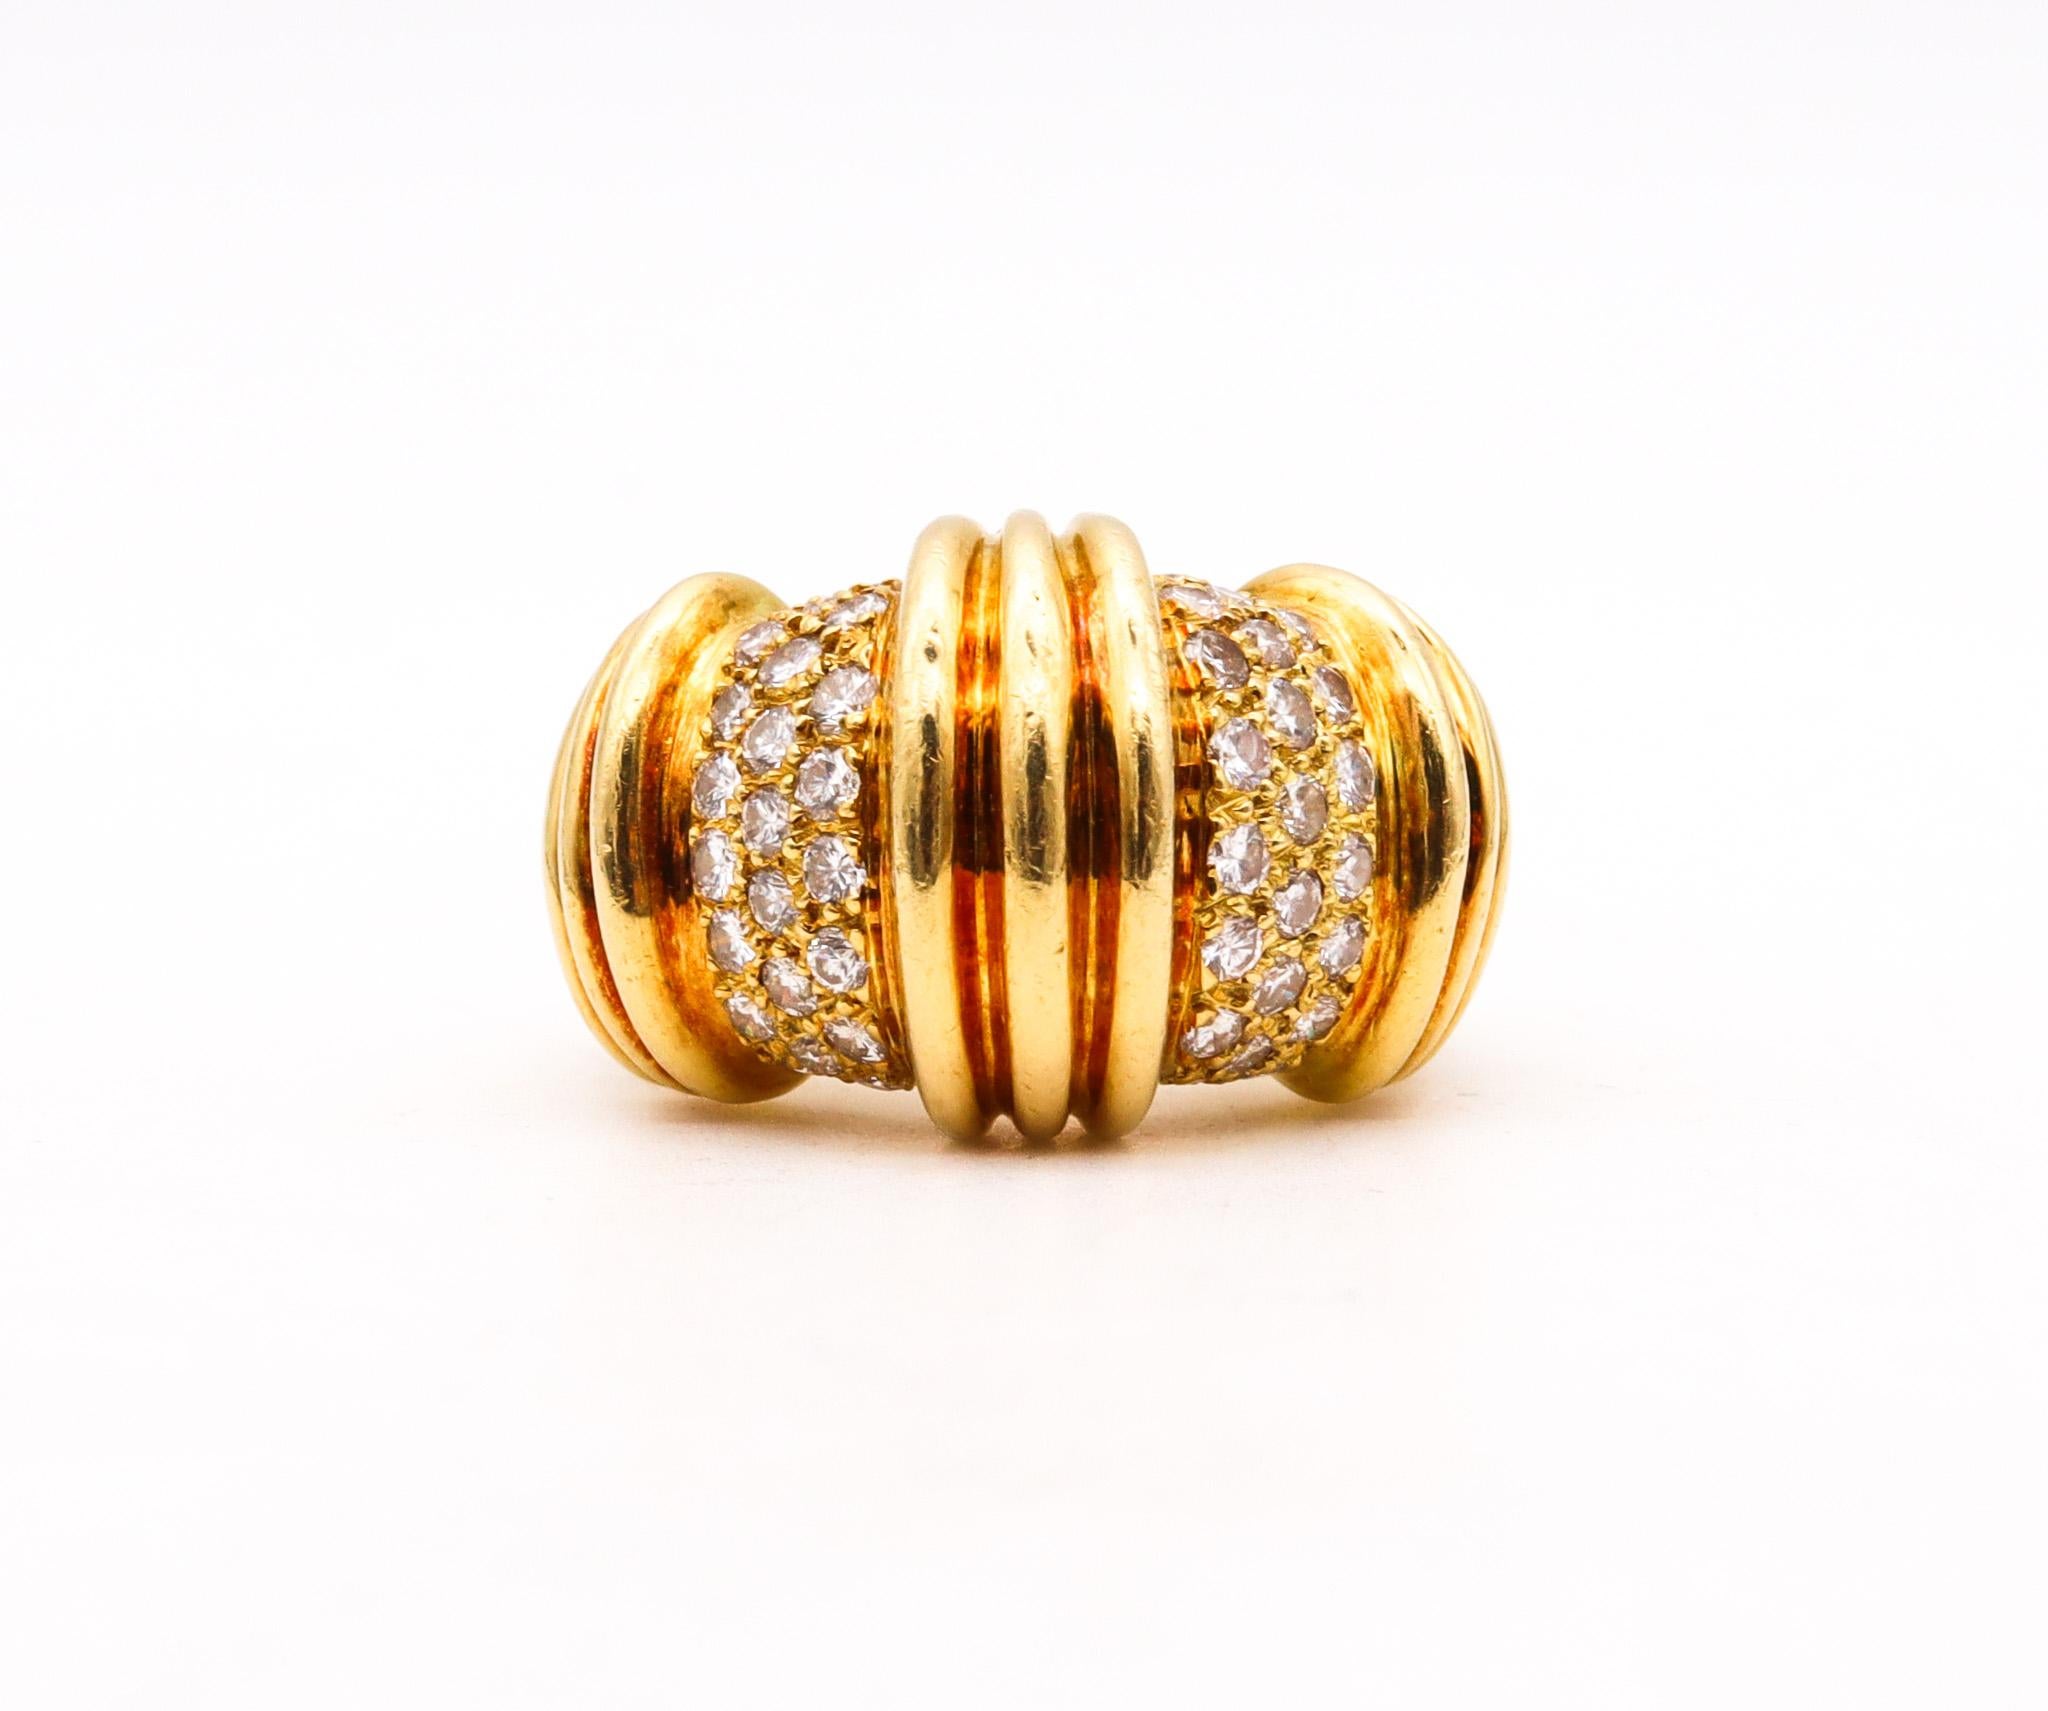 Brilliant Cut Charles Krypell Modernist Cocktail Ring In 18Kt Gold With 1.08 Cts In Diamonds For Sale